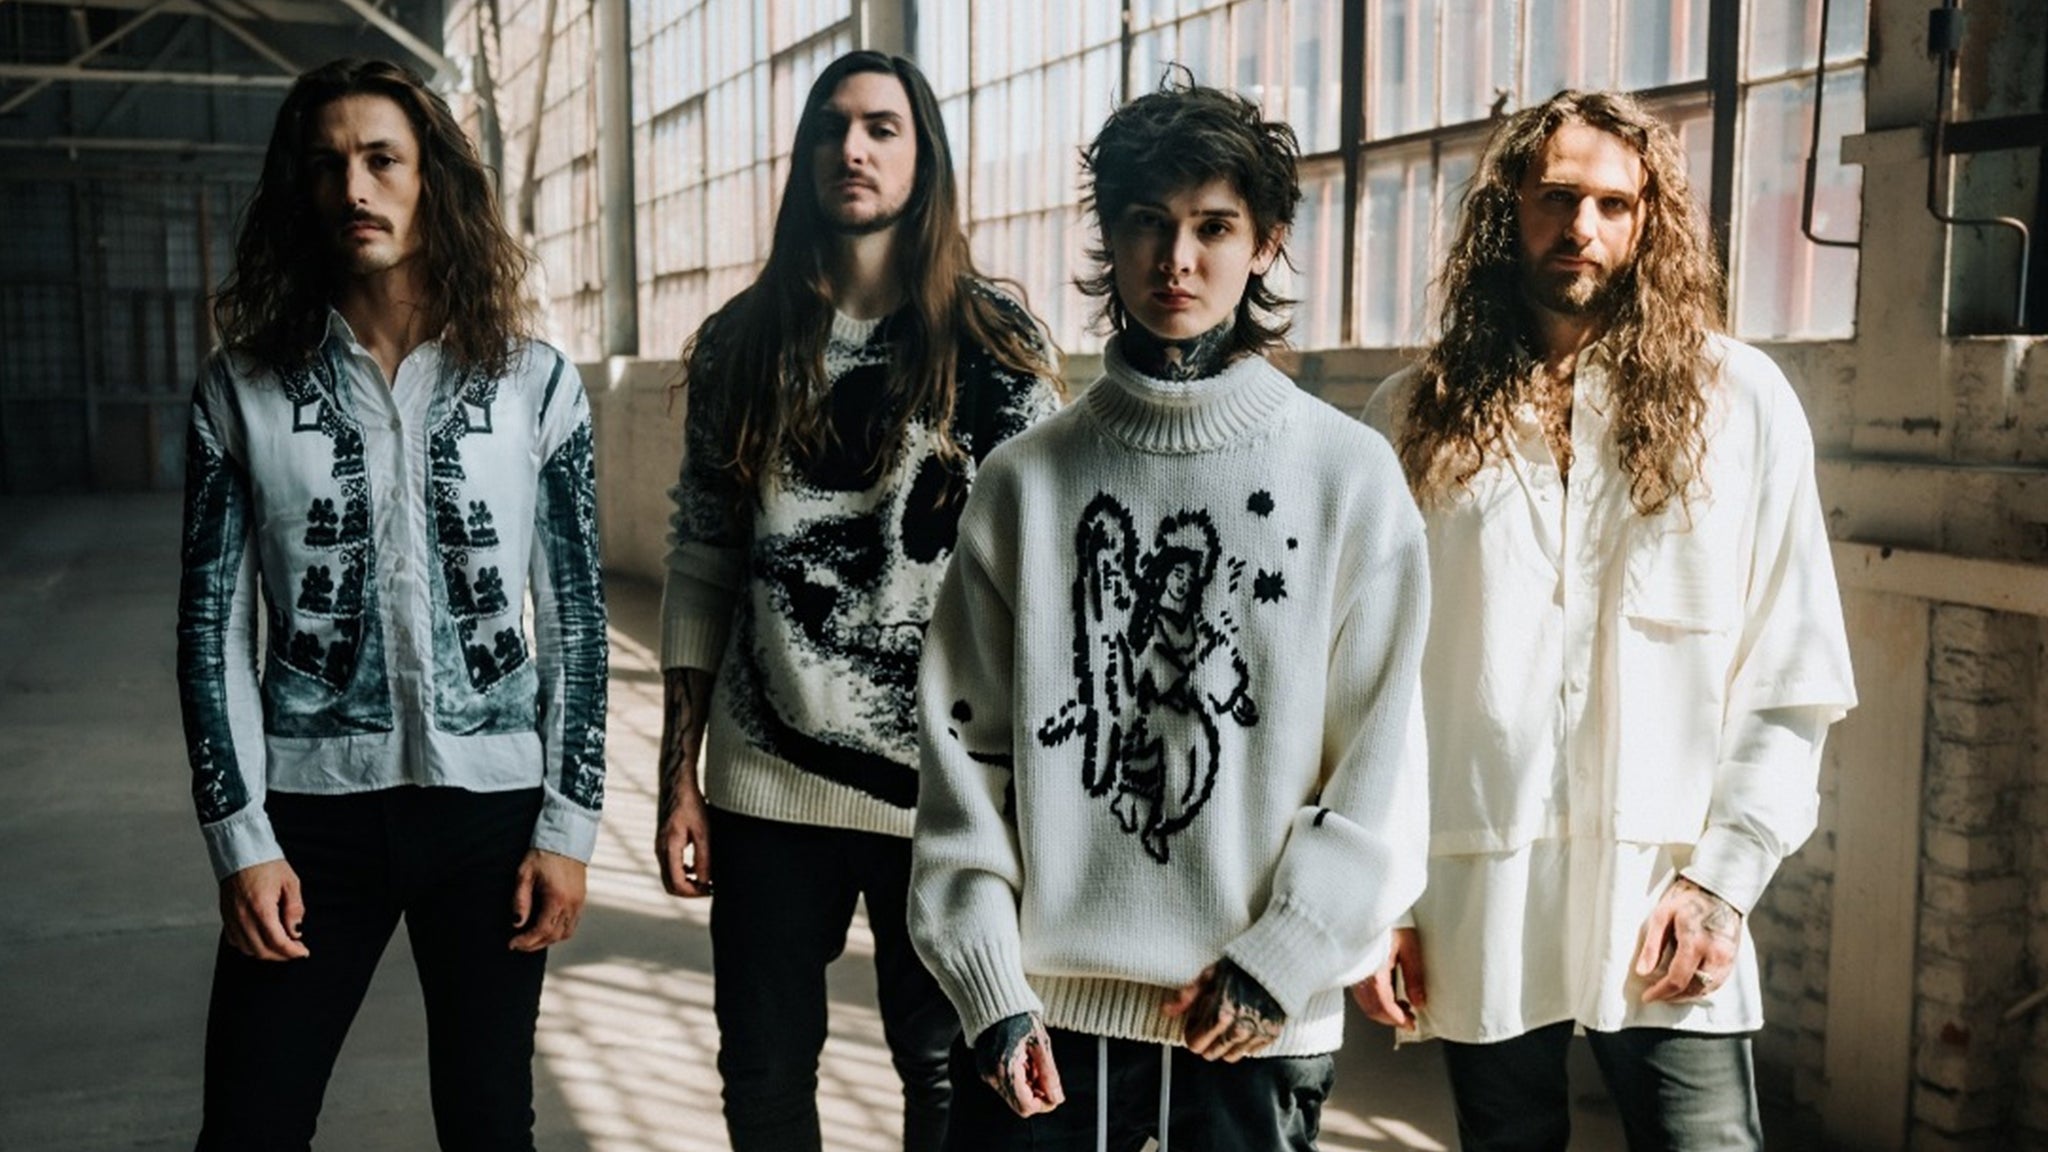 Polyphia - Remember That You Will Die Tour at The Wiltern - Los Angeles, CA 90010